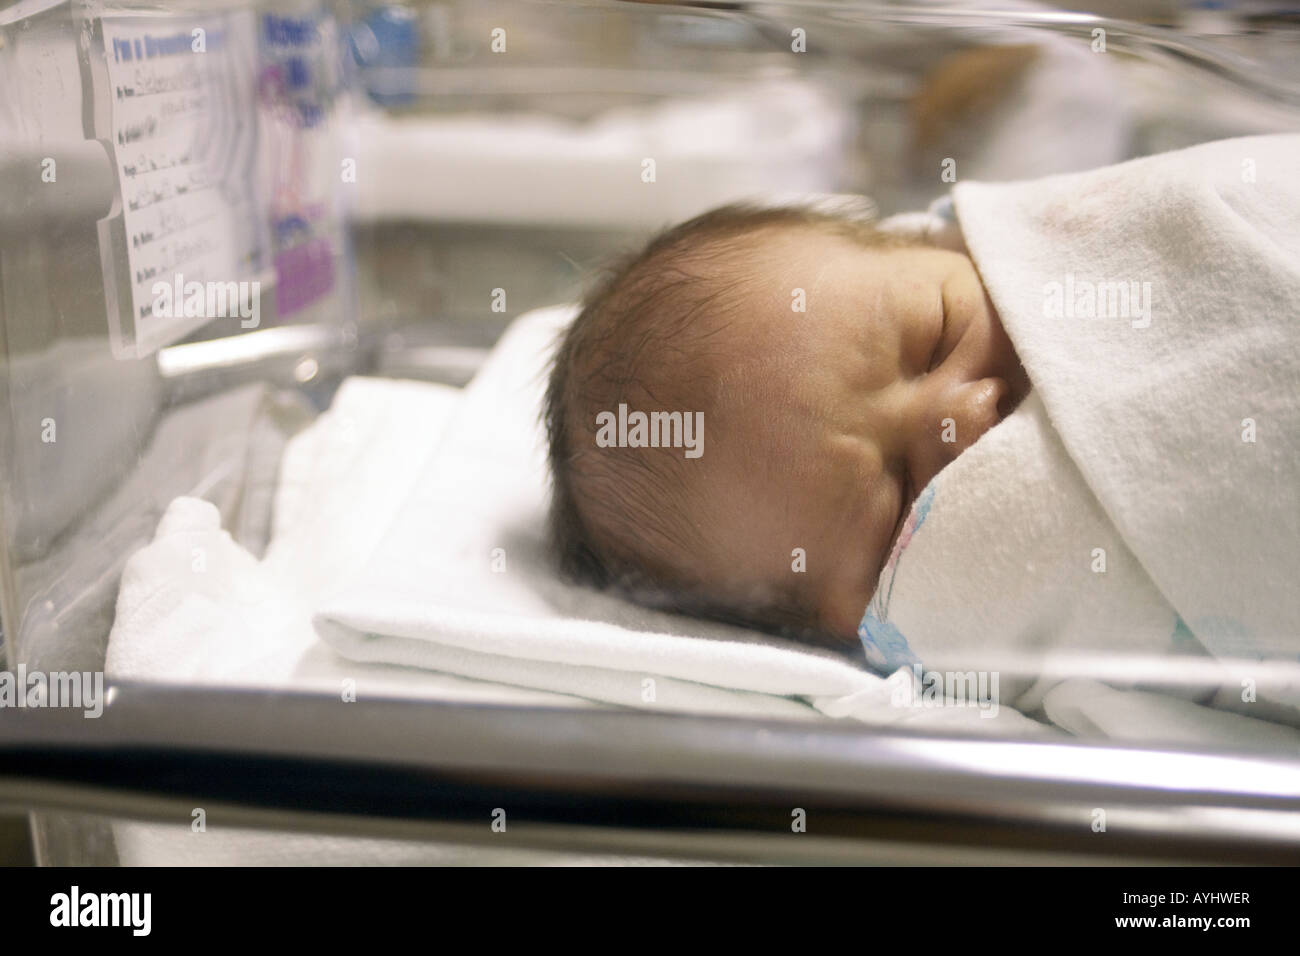 A newborn baby sleeping in a hospital nursery bed after childbirth. Stock Photo